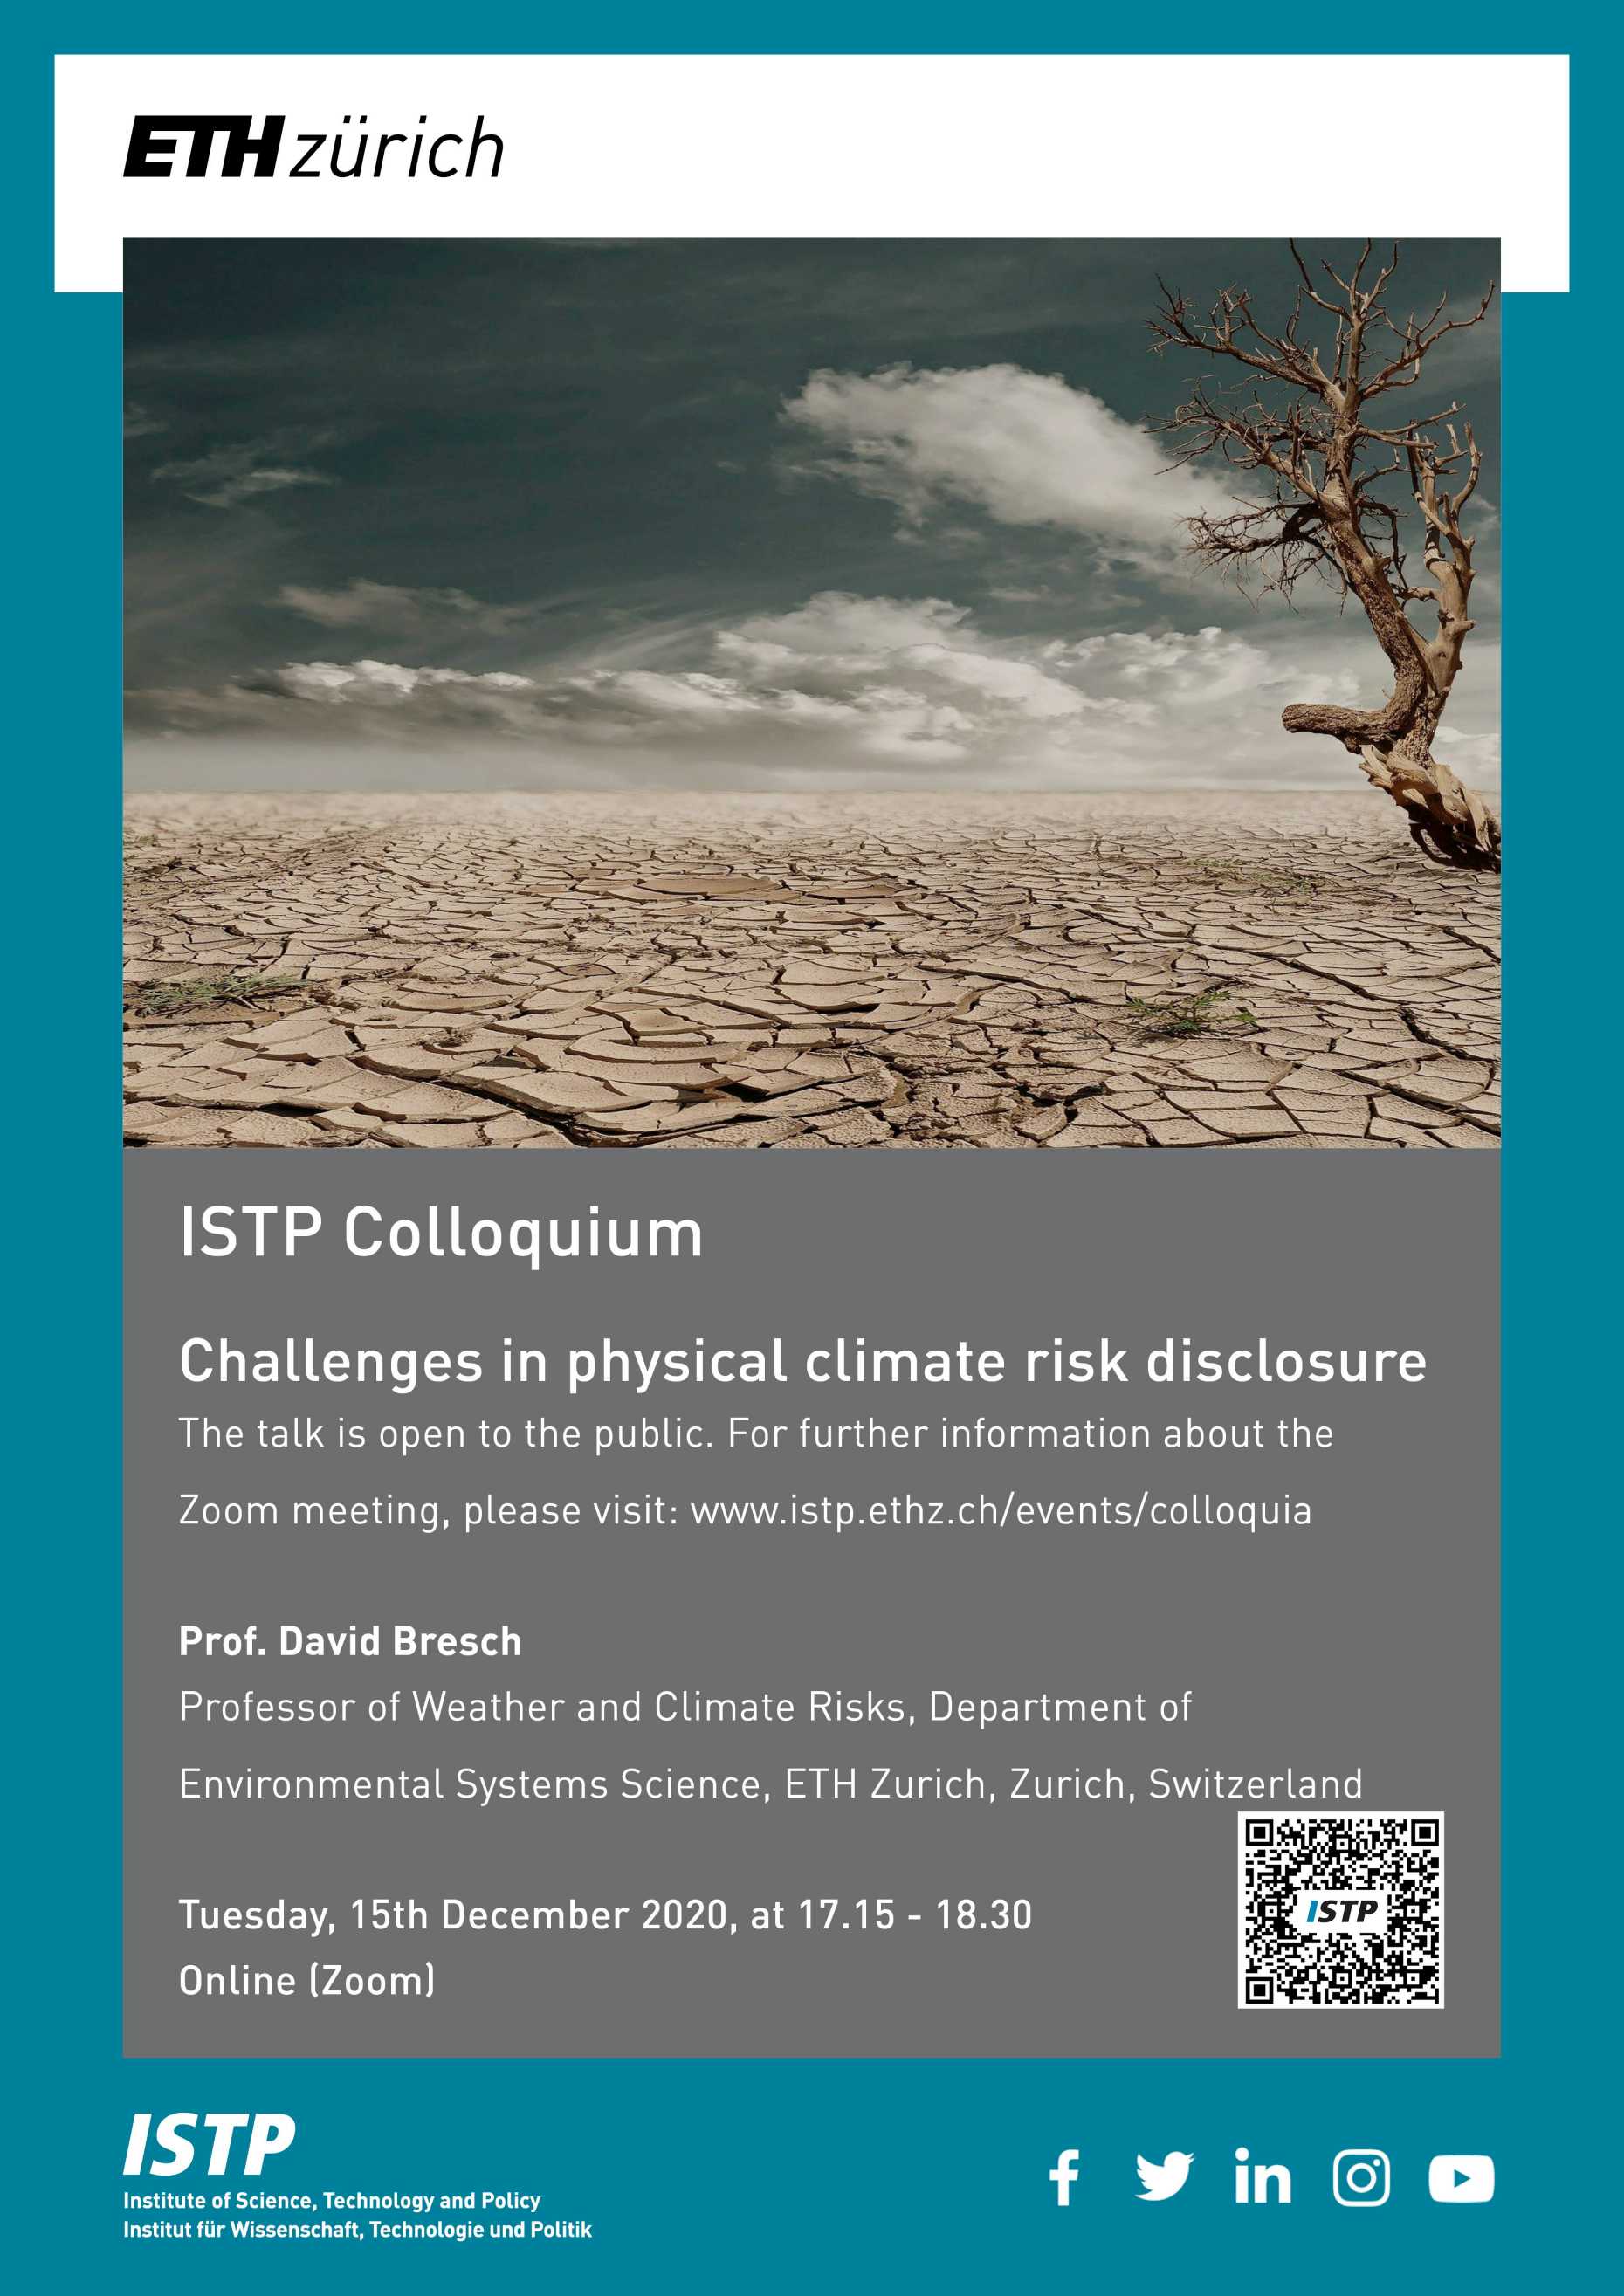 ISTP Colloquium: Challenges in physical climate risk disclosure